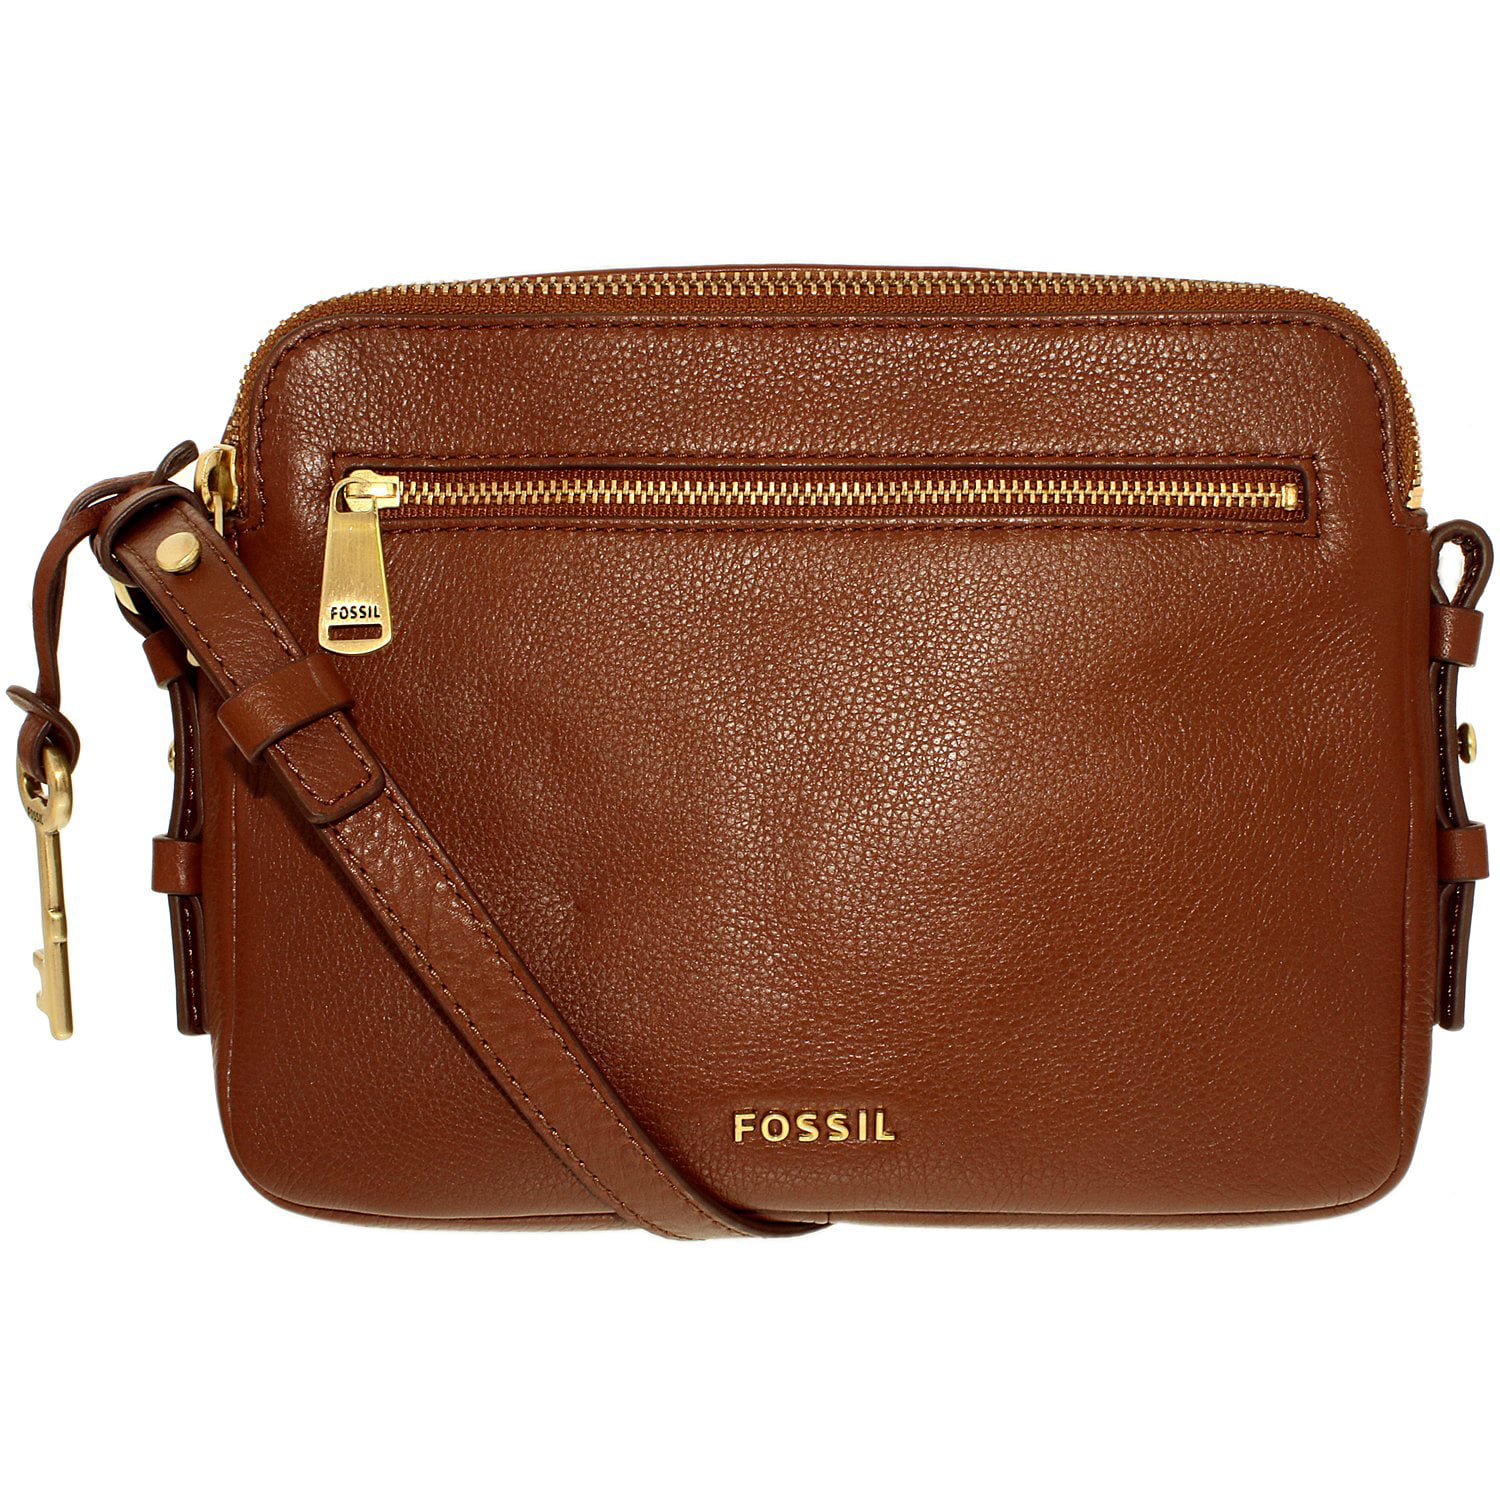 Fossil - Fossil Women's Piper Toaster Leather Crossbody Cross Body Bag ...